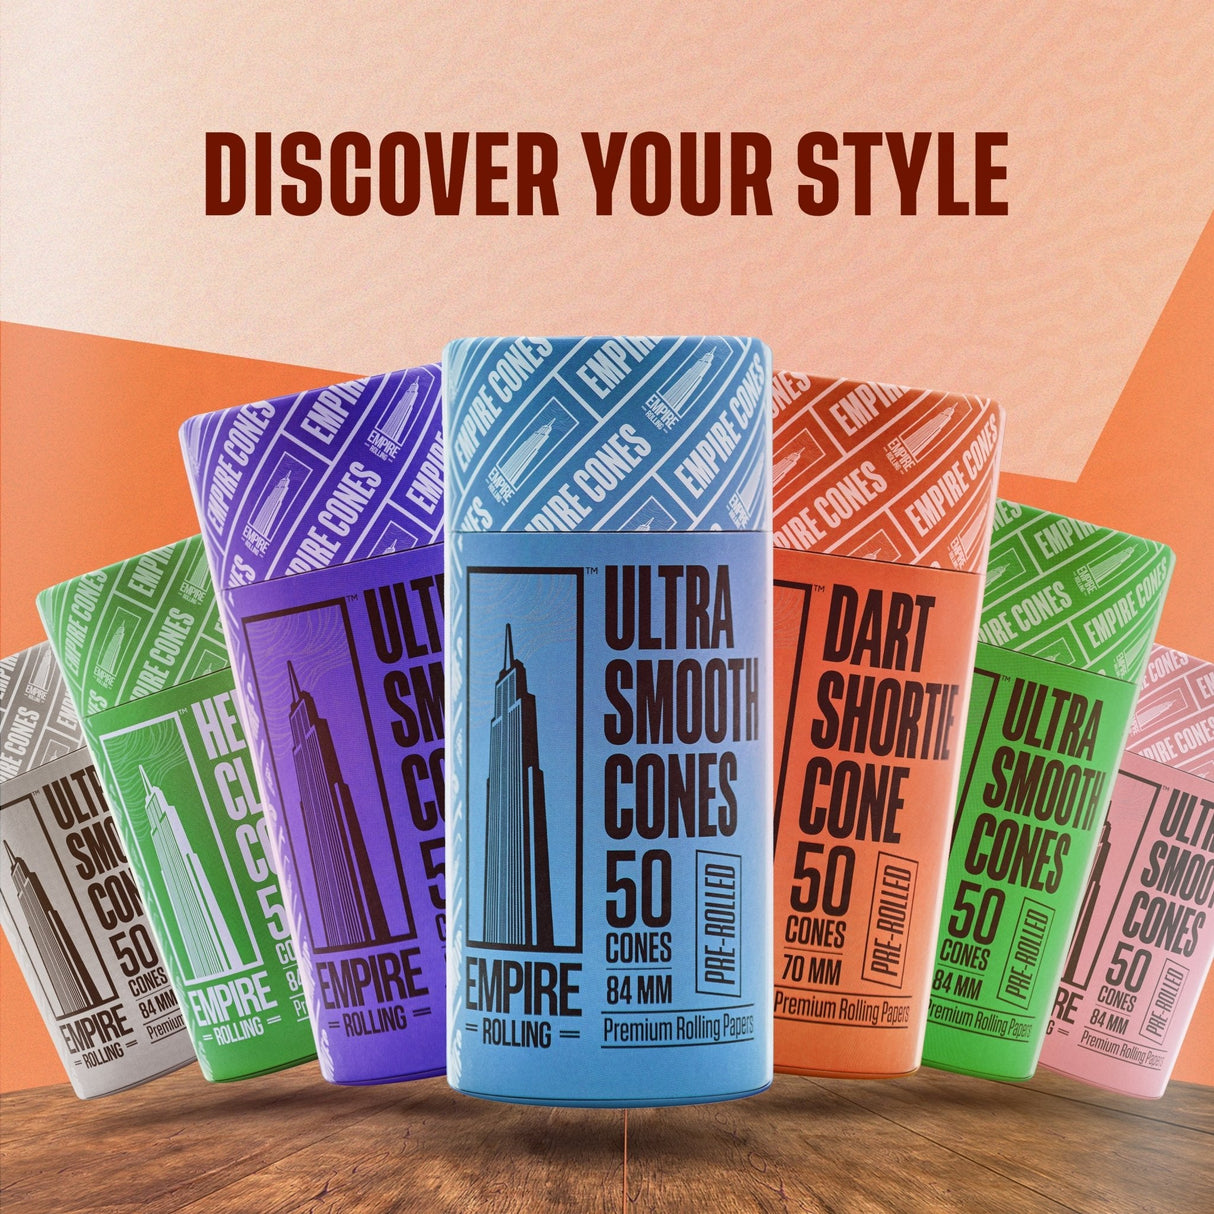 Empire Rolling Papers Ultra Smooth Dart Cones in various colors displayed with branding